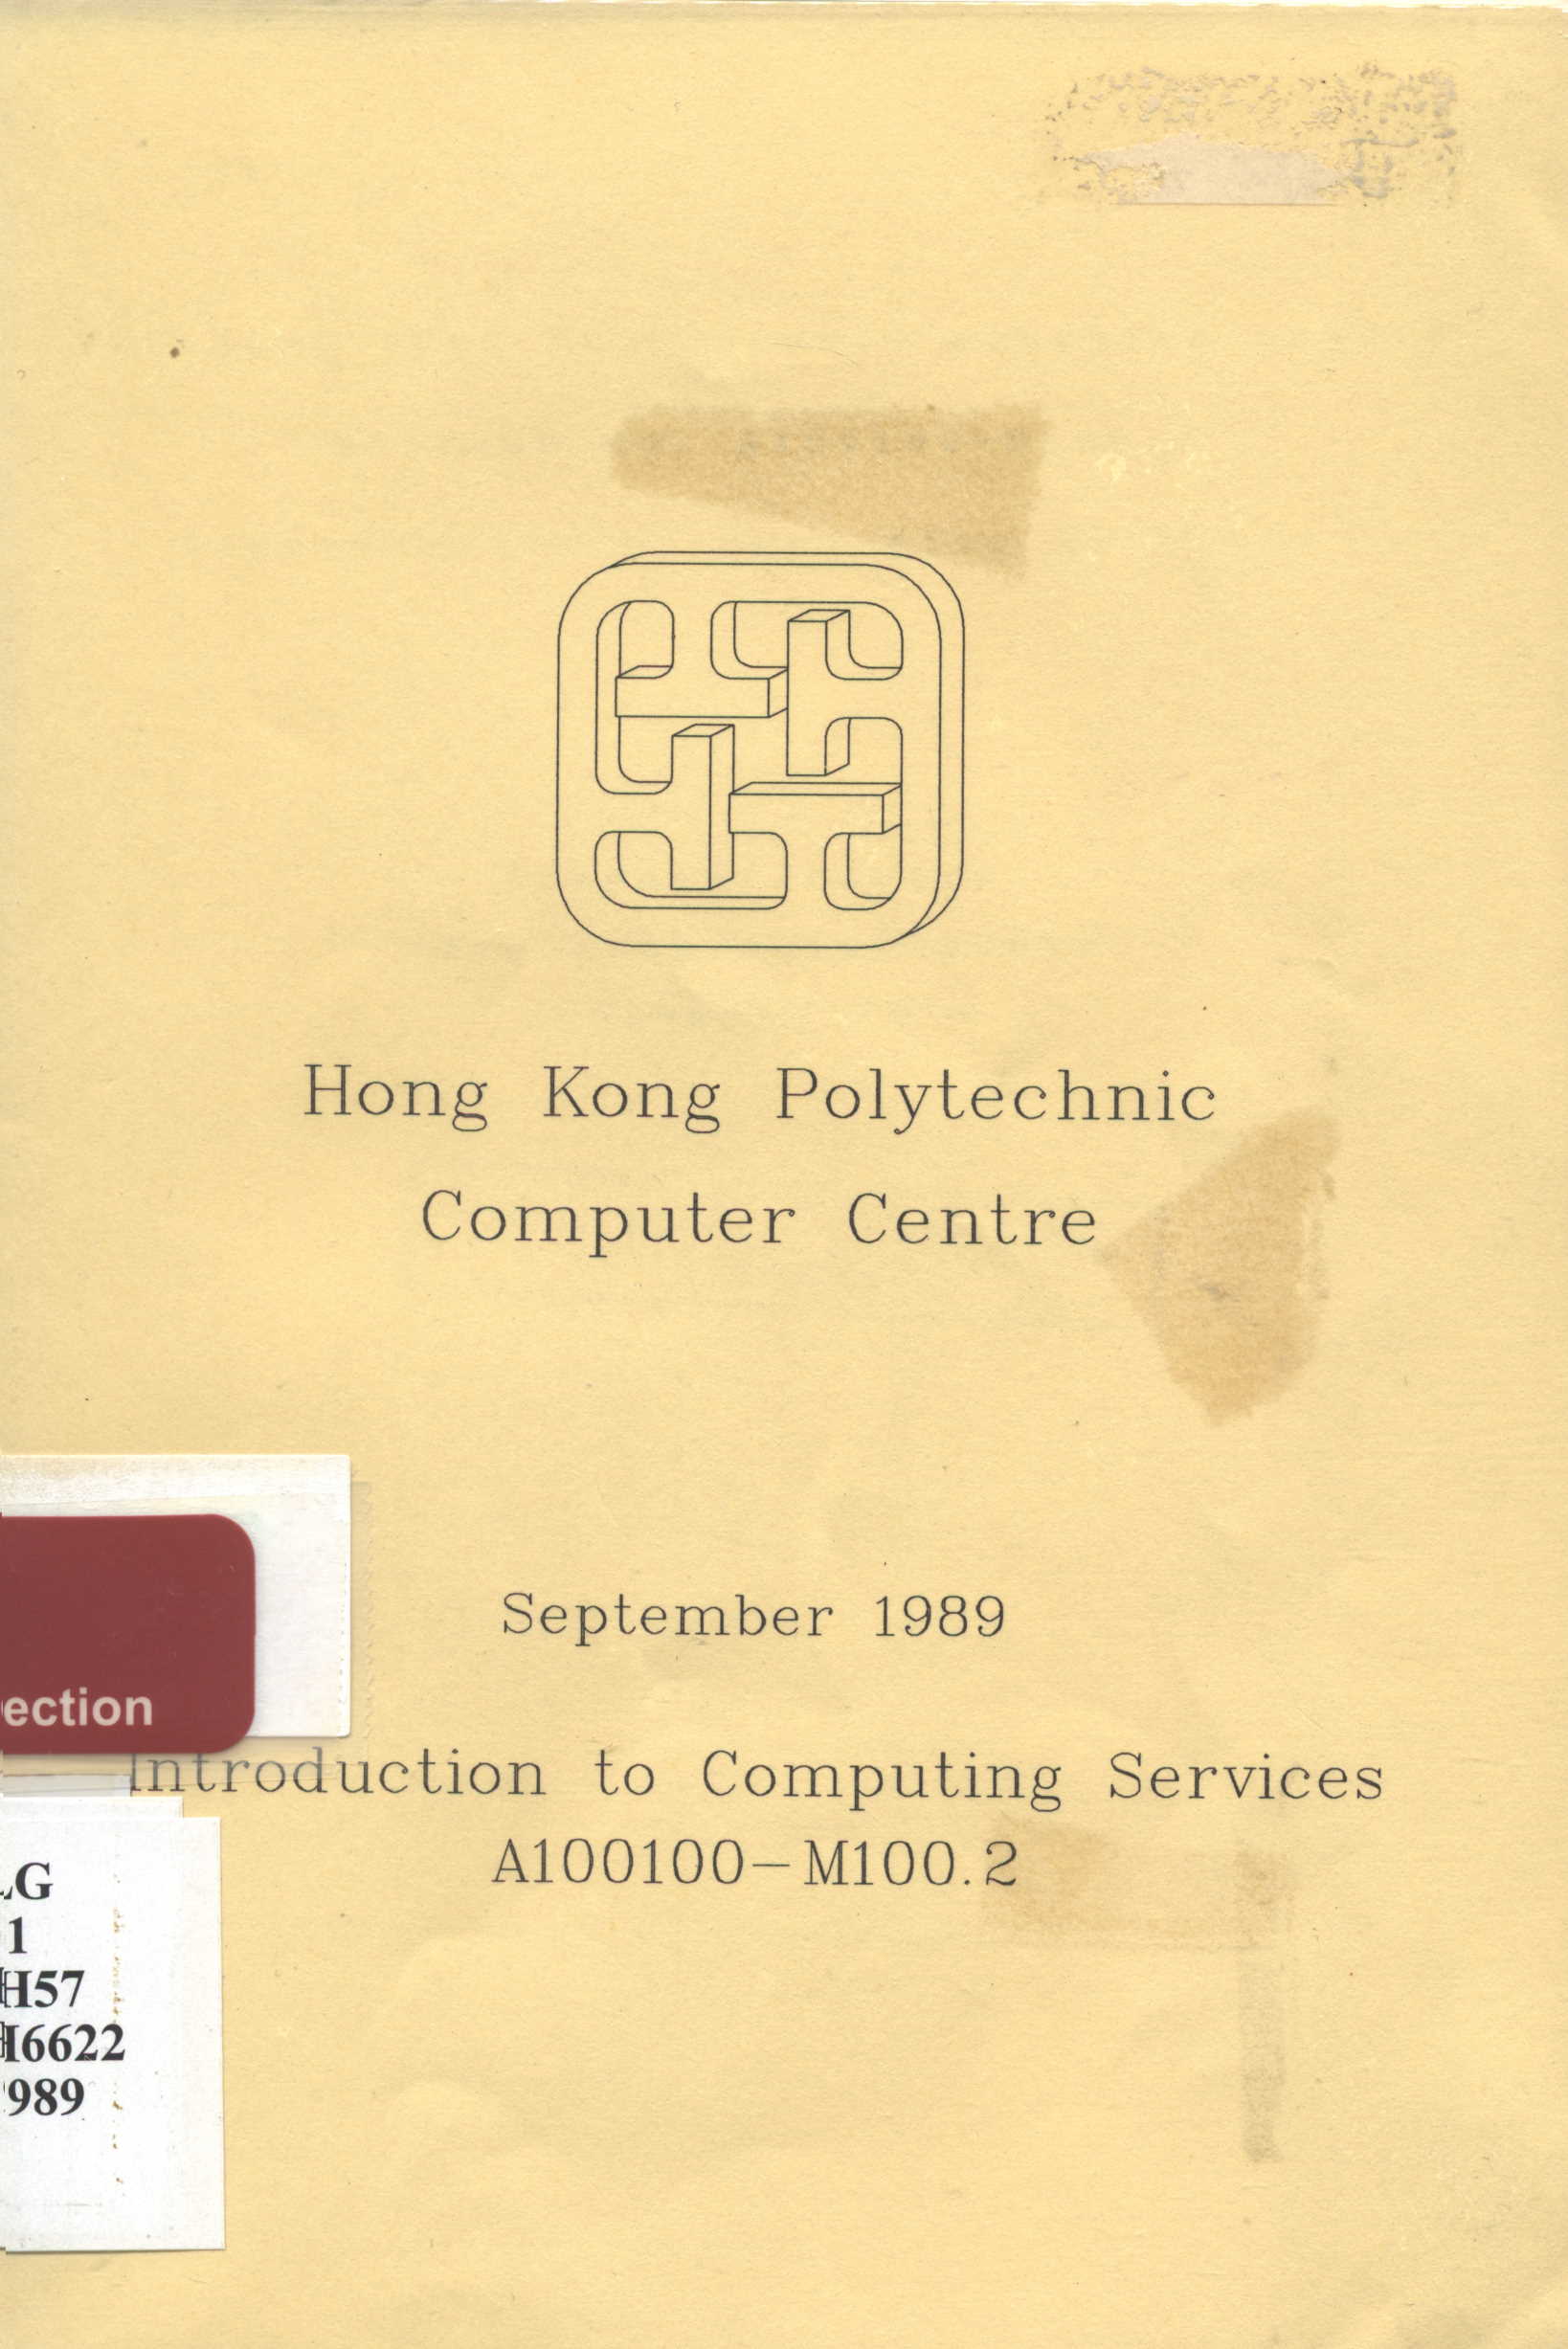 Introduction to computing services [1989]